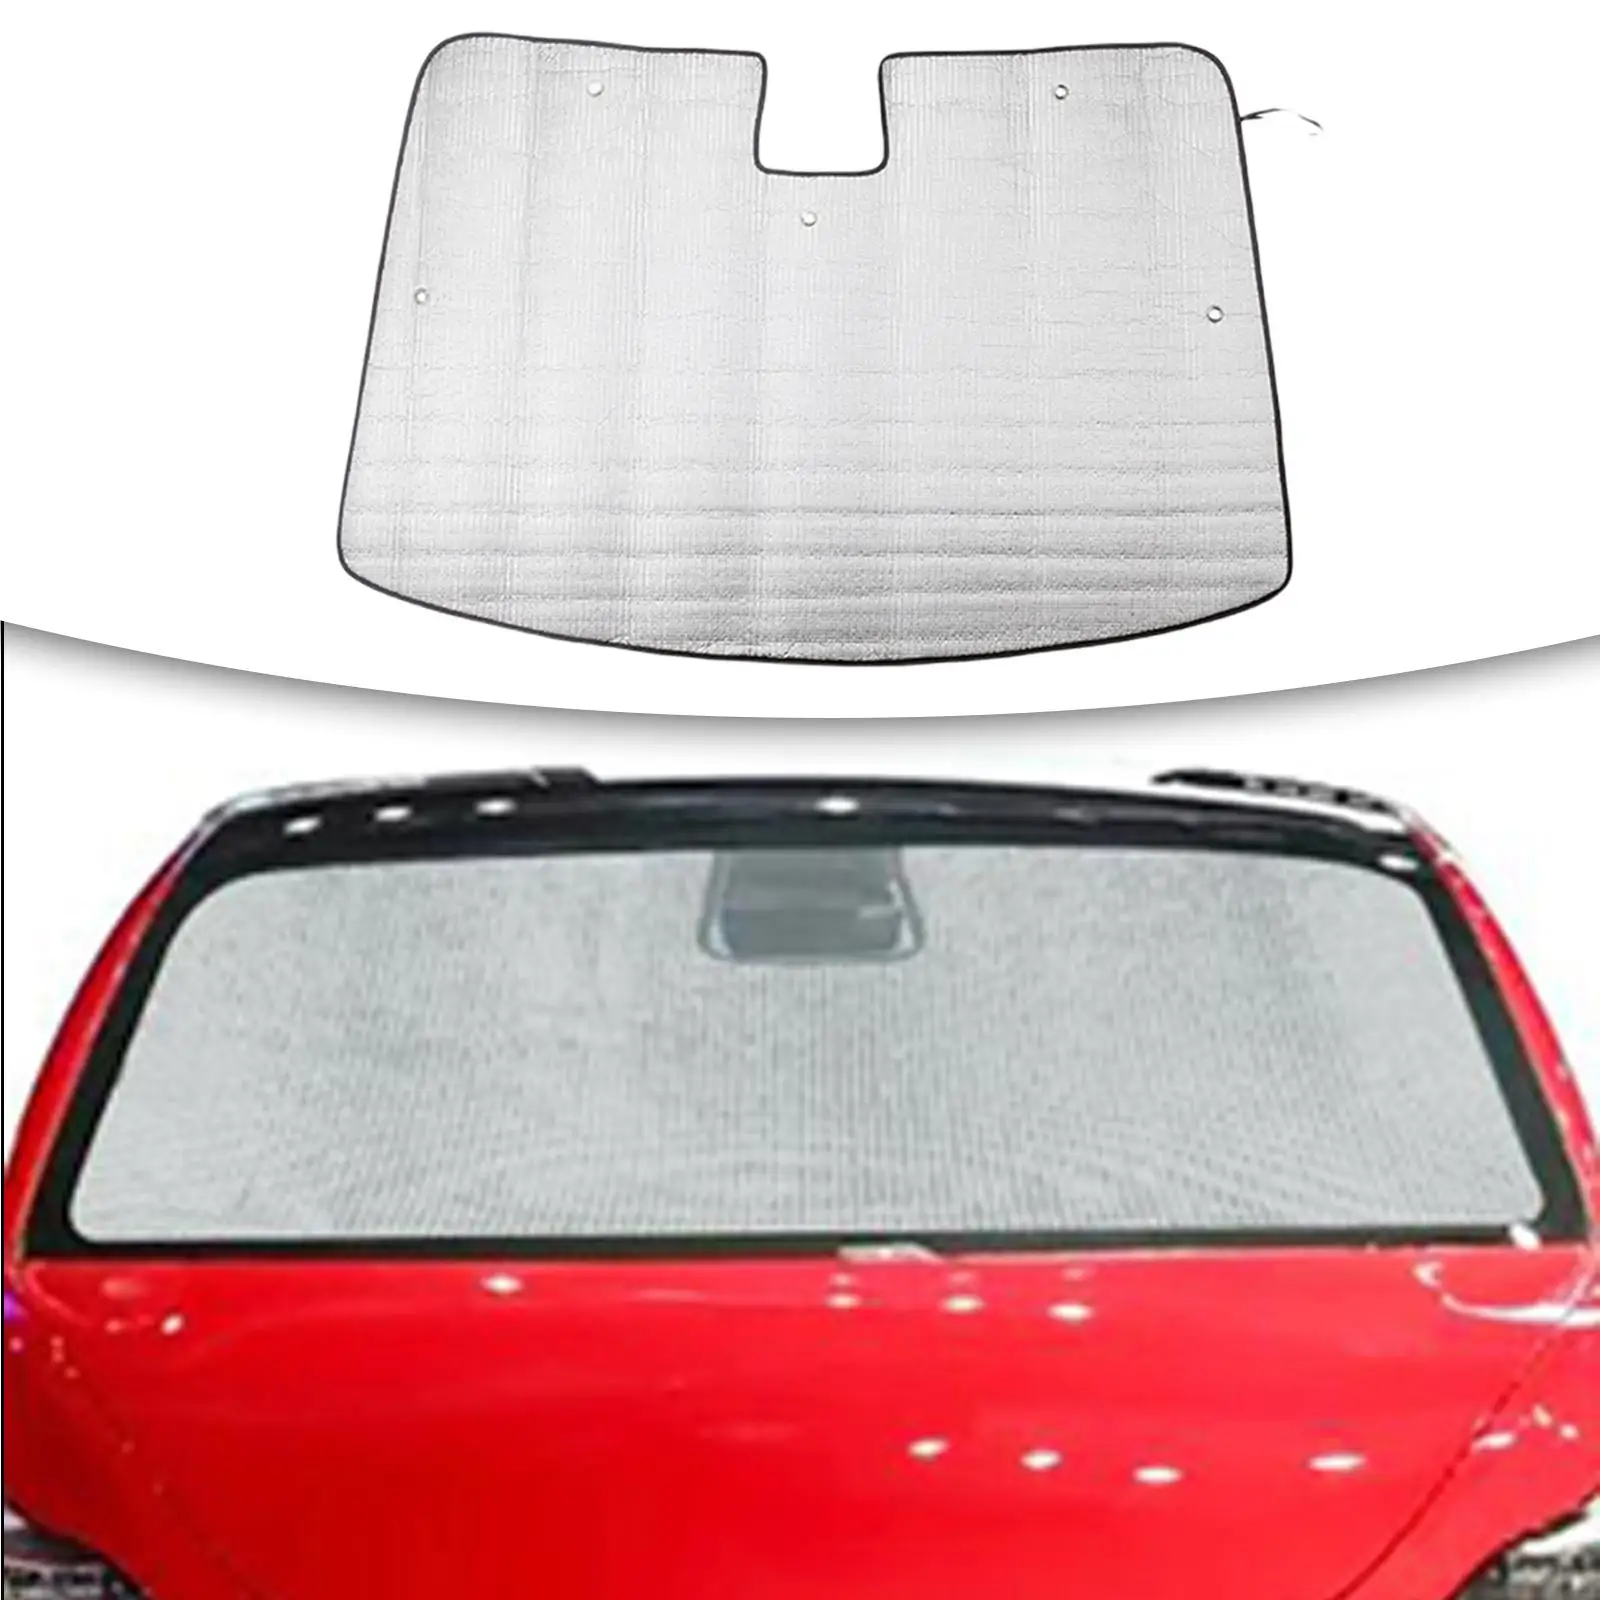 Car Windshield Sunshade Sun Visor Foldable Silver Protection Shield Cover Fit for Tesla Model 3 17-19 Auto Parts Car Supplies